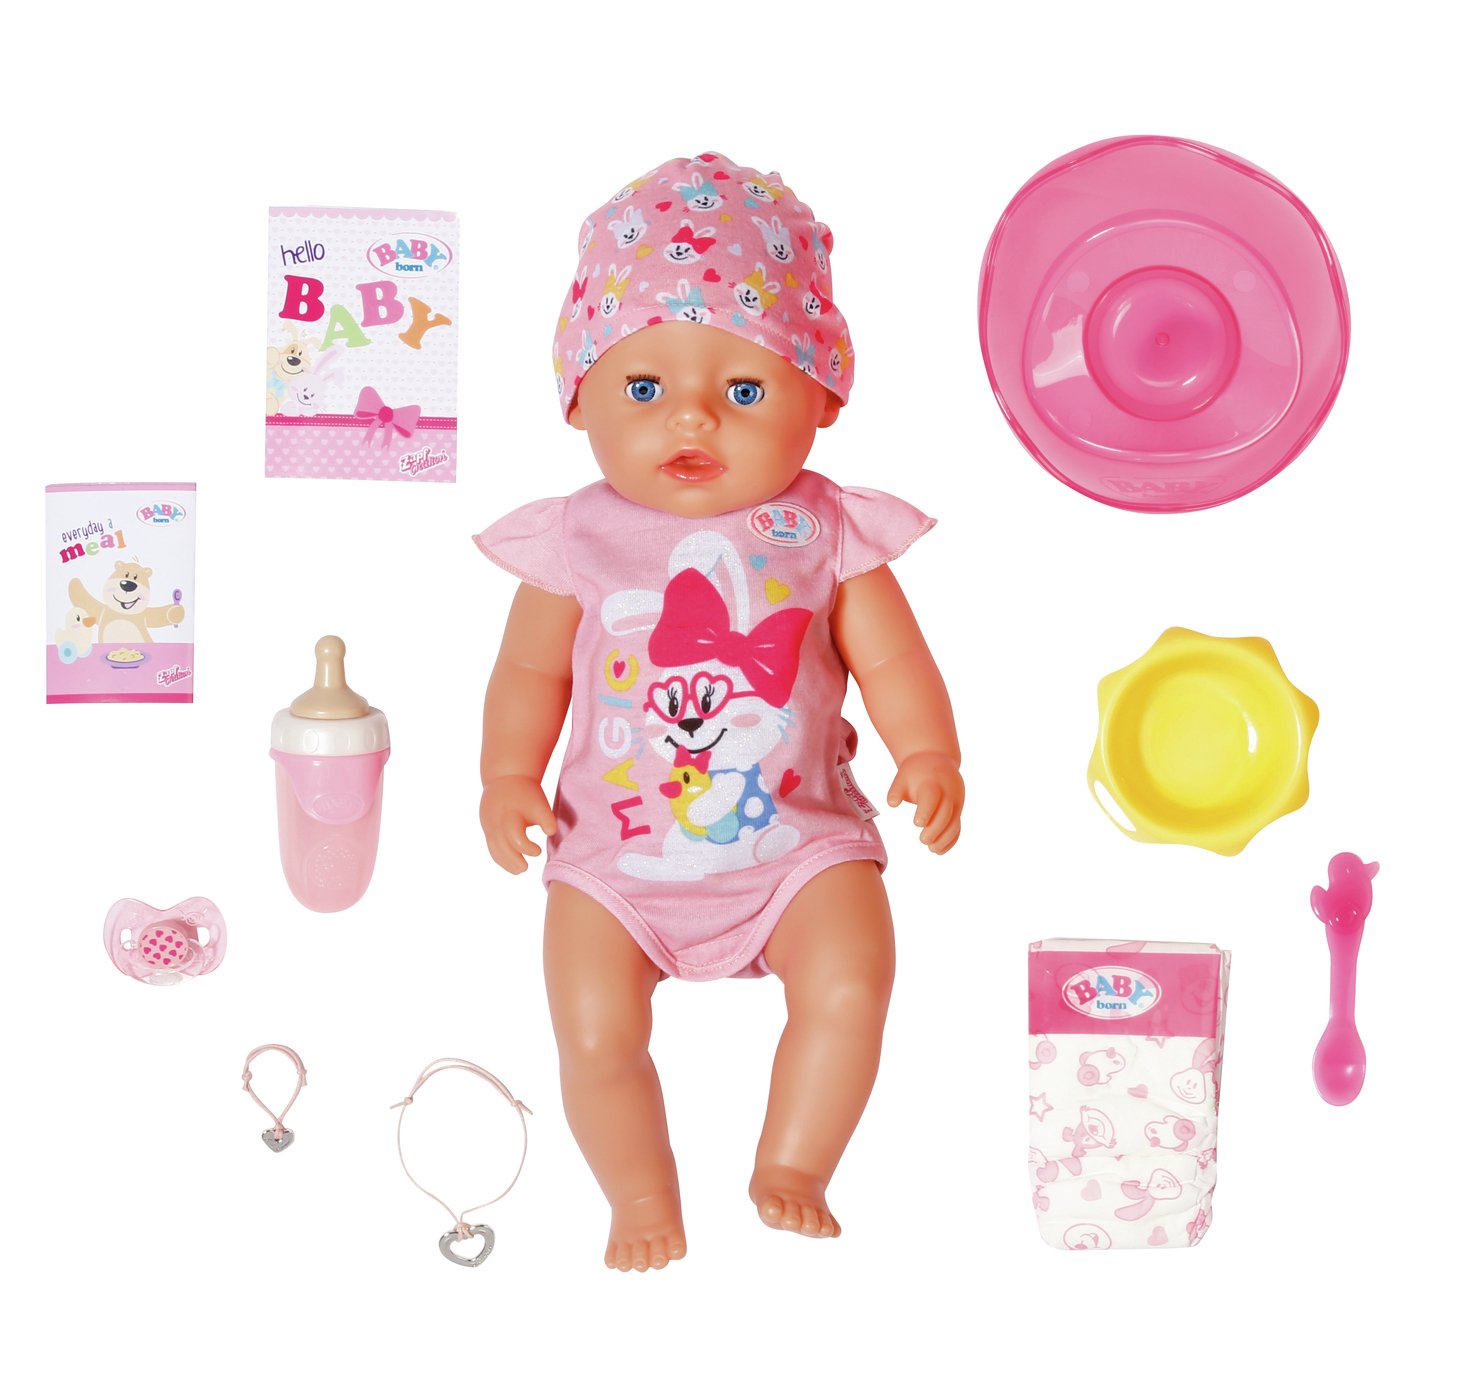 BABY born Magic Girl Doll in Light Pink Outfit - 17inch/43cm